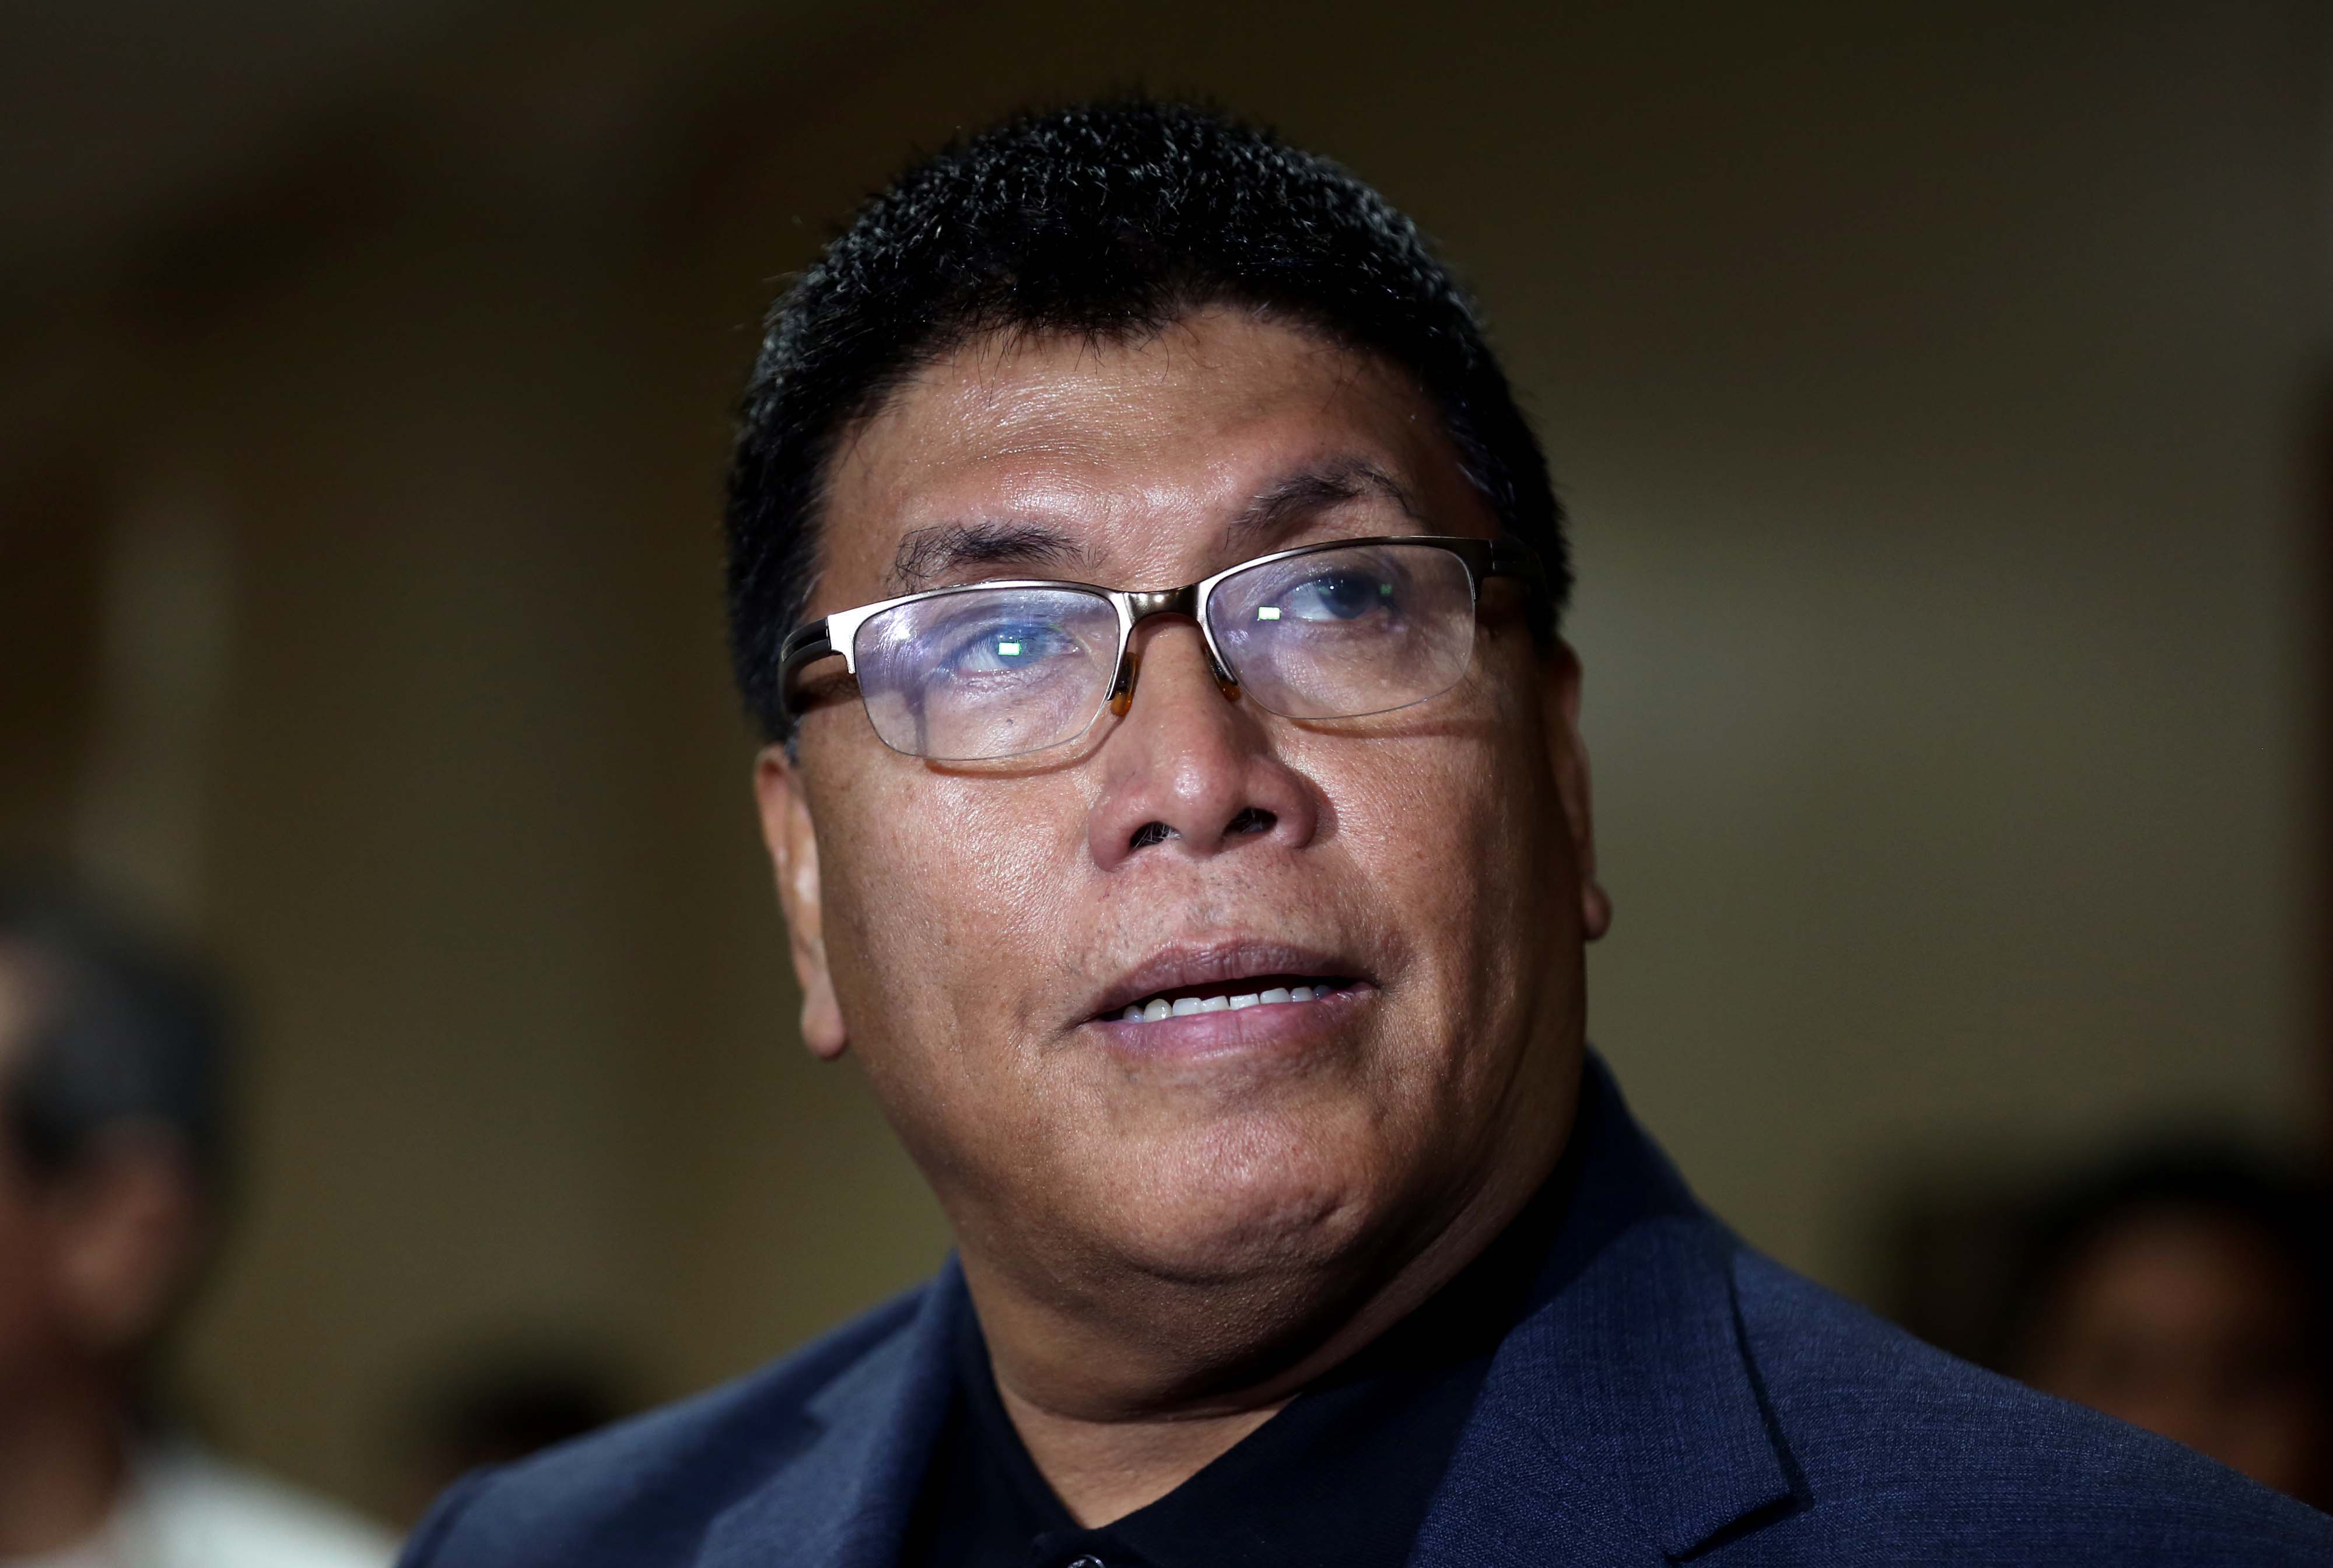 comelec cancels pichay’s coc in may 2022 polls